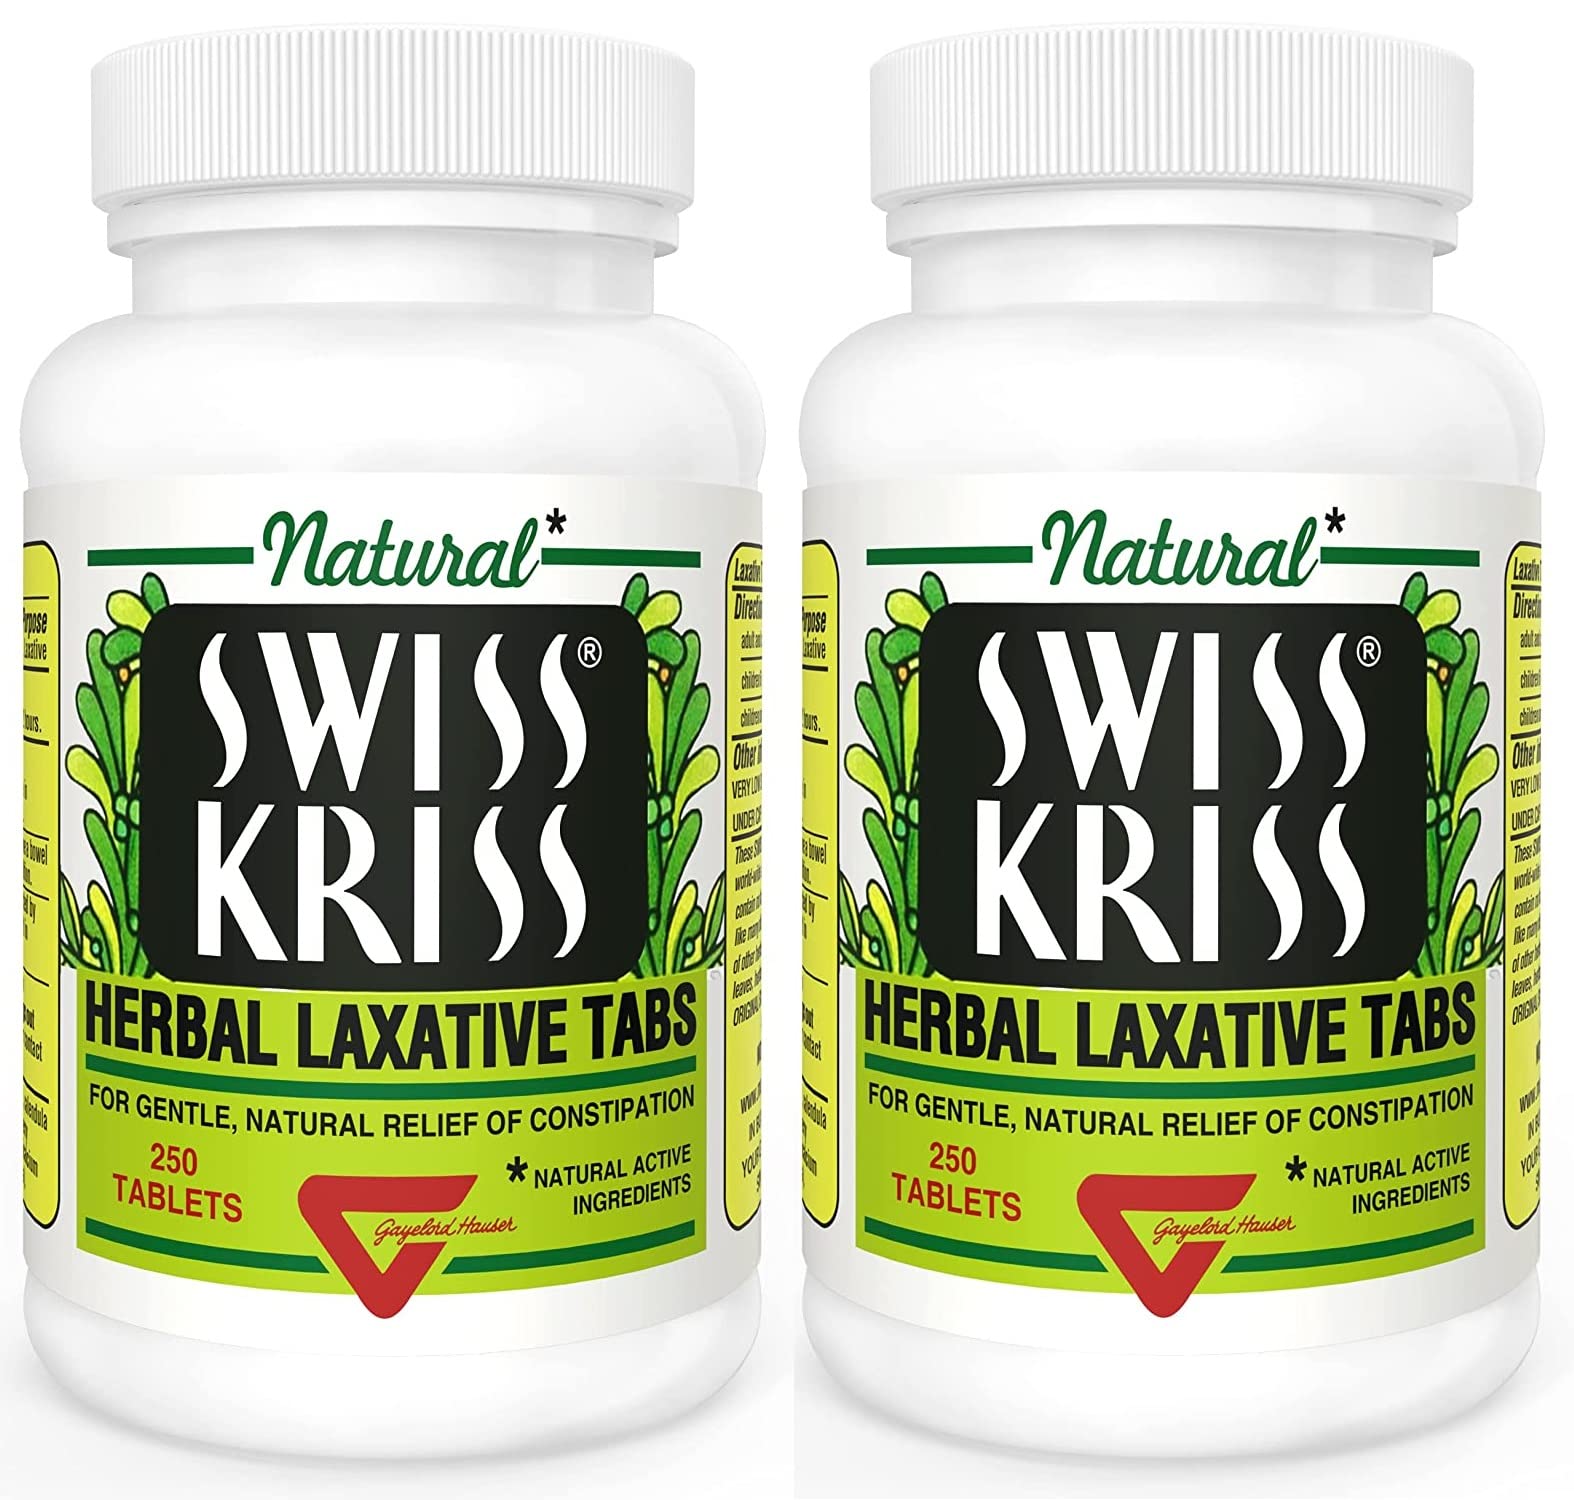 Swiss Kriss Herbal Laxative Tablets, Gentle & Natural Laxatives for Constipation Relief for Adults & Children Over Age 6, Works 